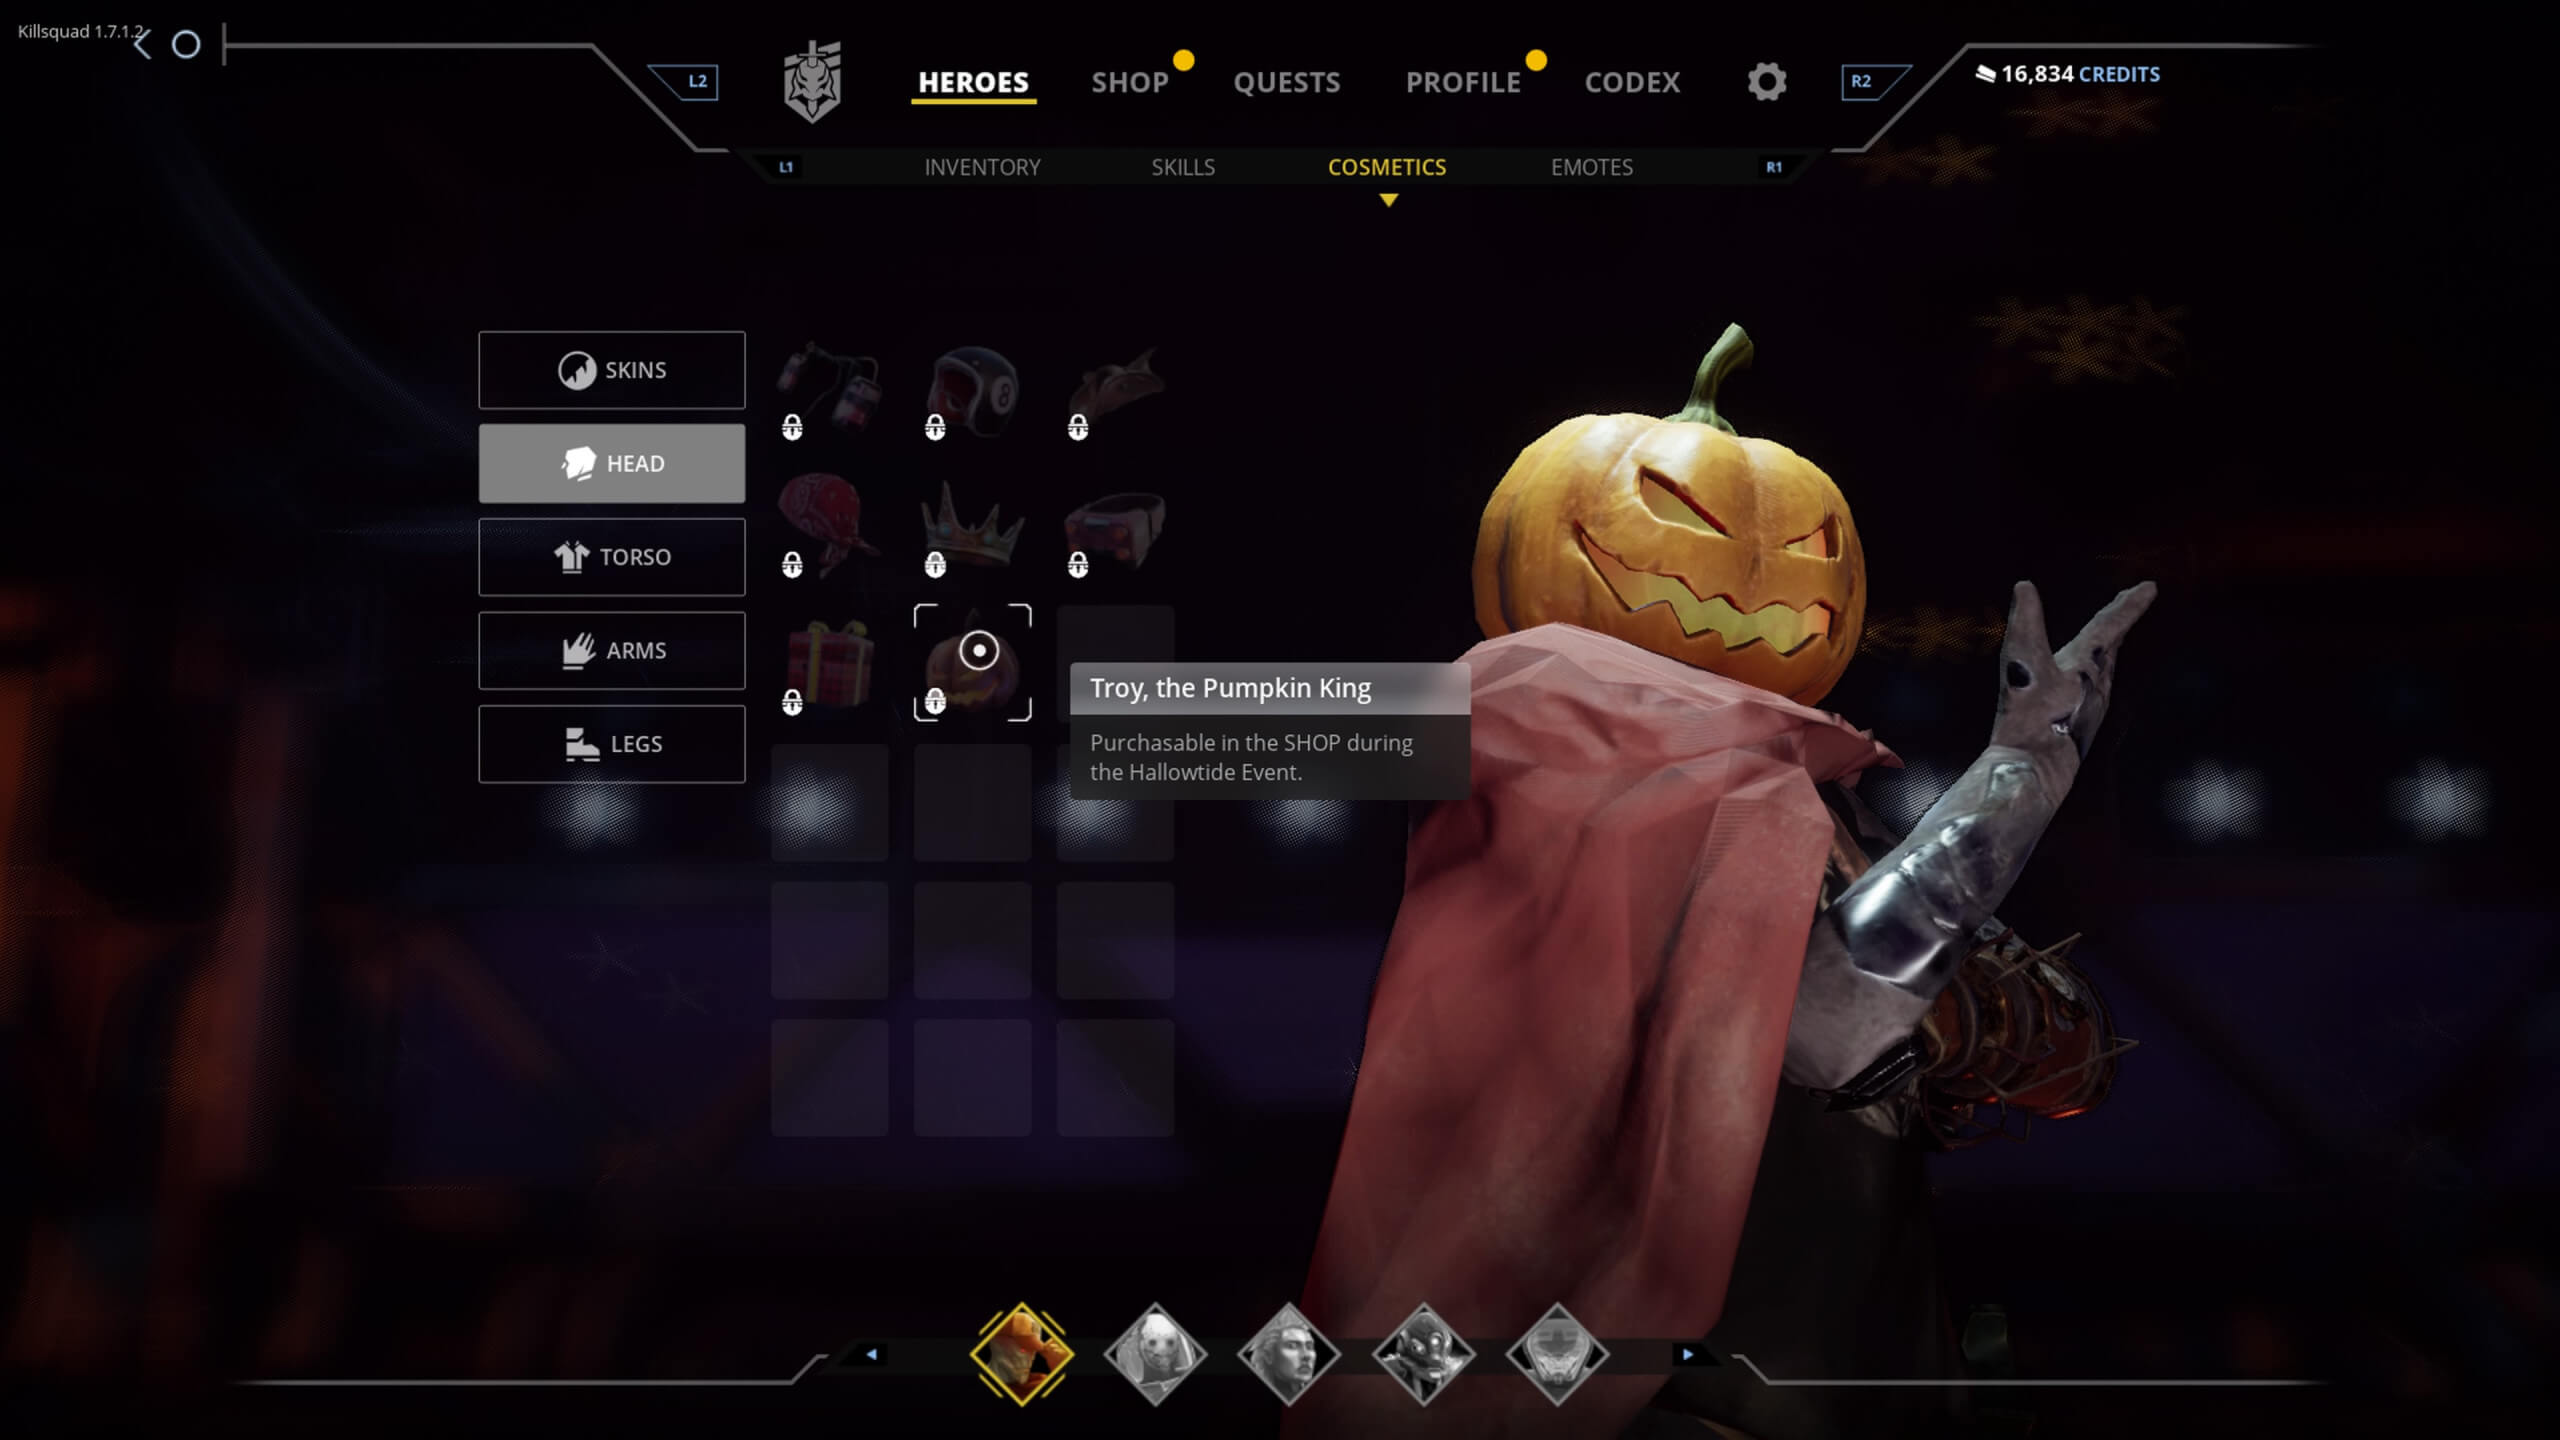 One of the Bounty Hunters, Troy, wearing a carved Pumpkin Mask whilst posing in a red cloak on the cosmetic menu.